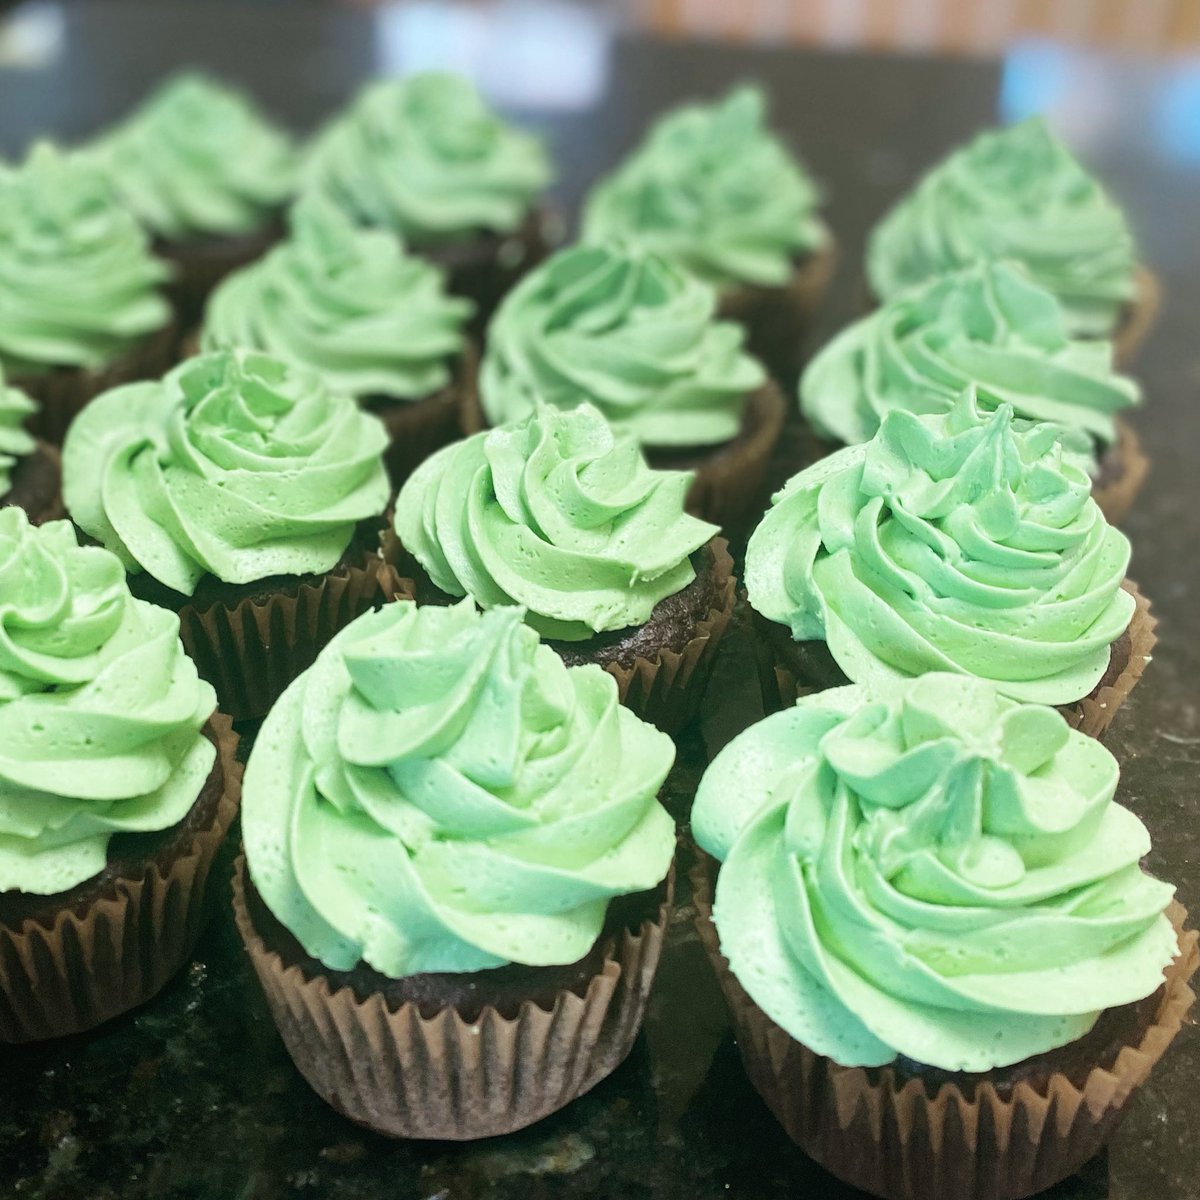 I’m juuuust Irish enough to justify a weekend that involved Lucky Charms for breakfast, Dairy Queen for lunch, and these mocha Guinness cupcakes for dinner…. Happy St Patrick’s Day! ☘️